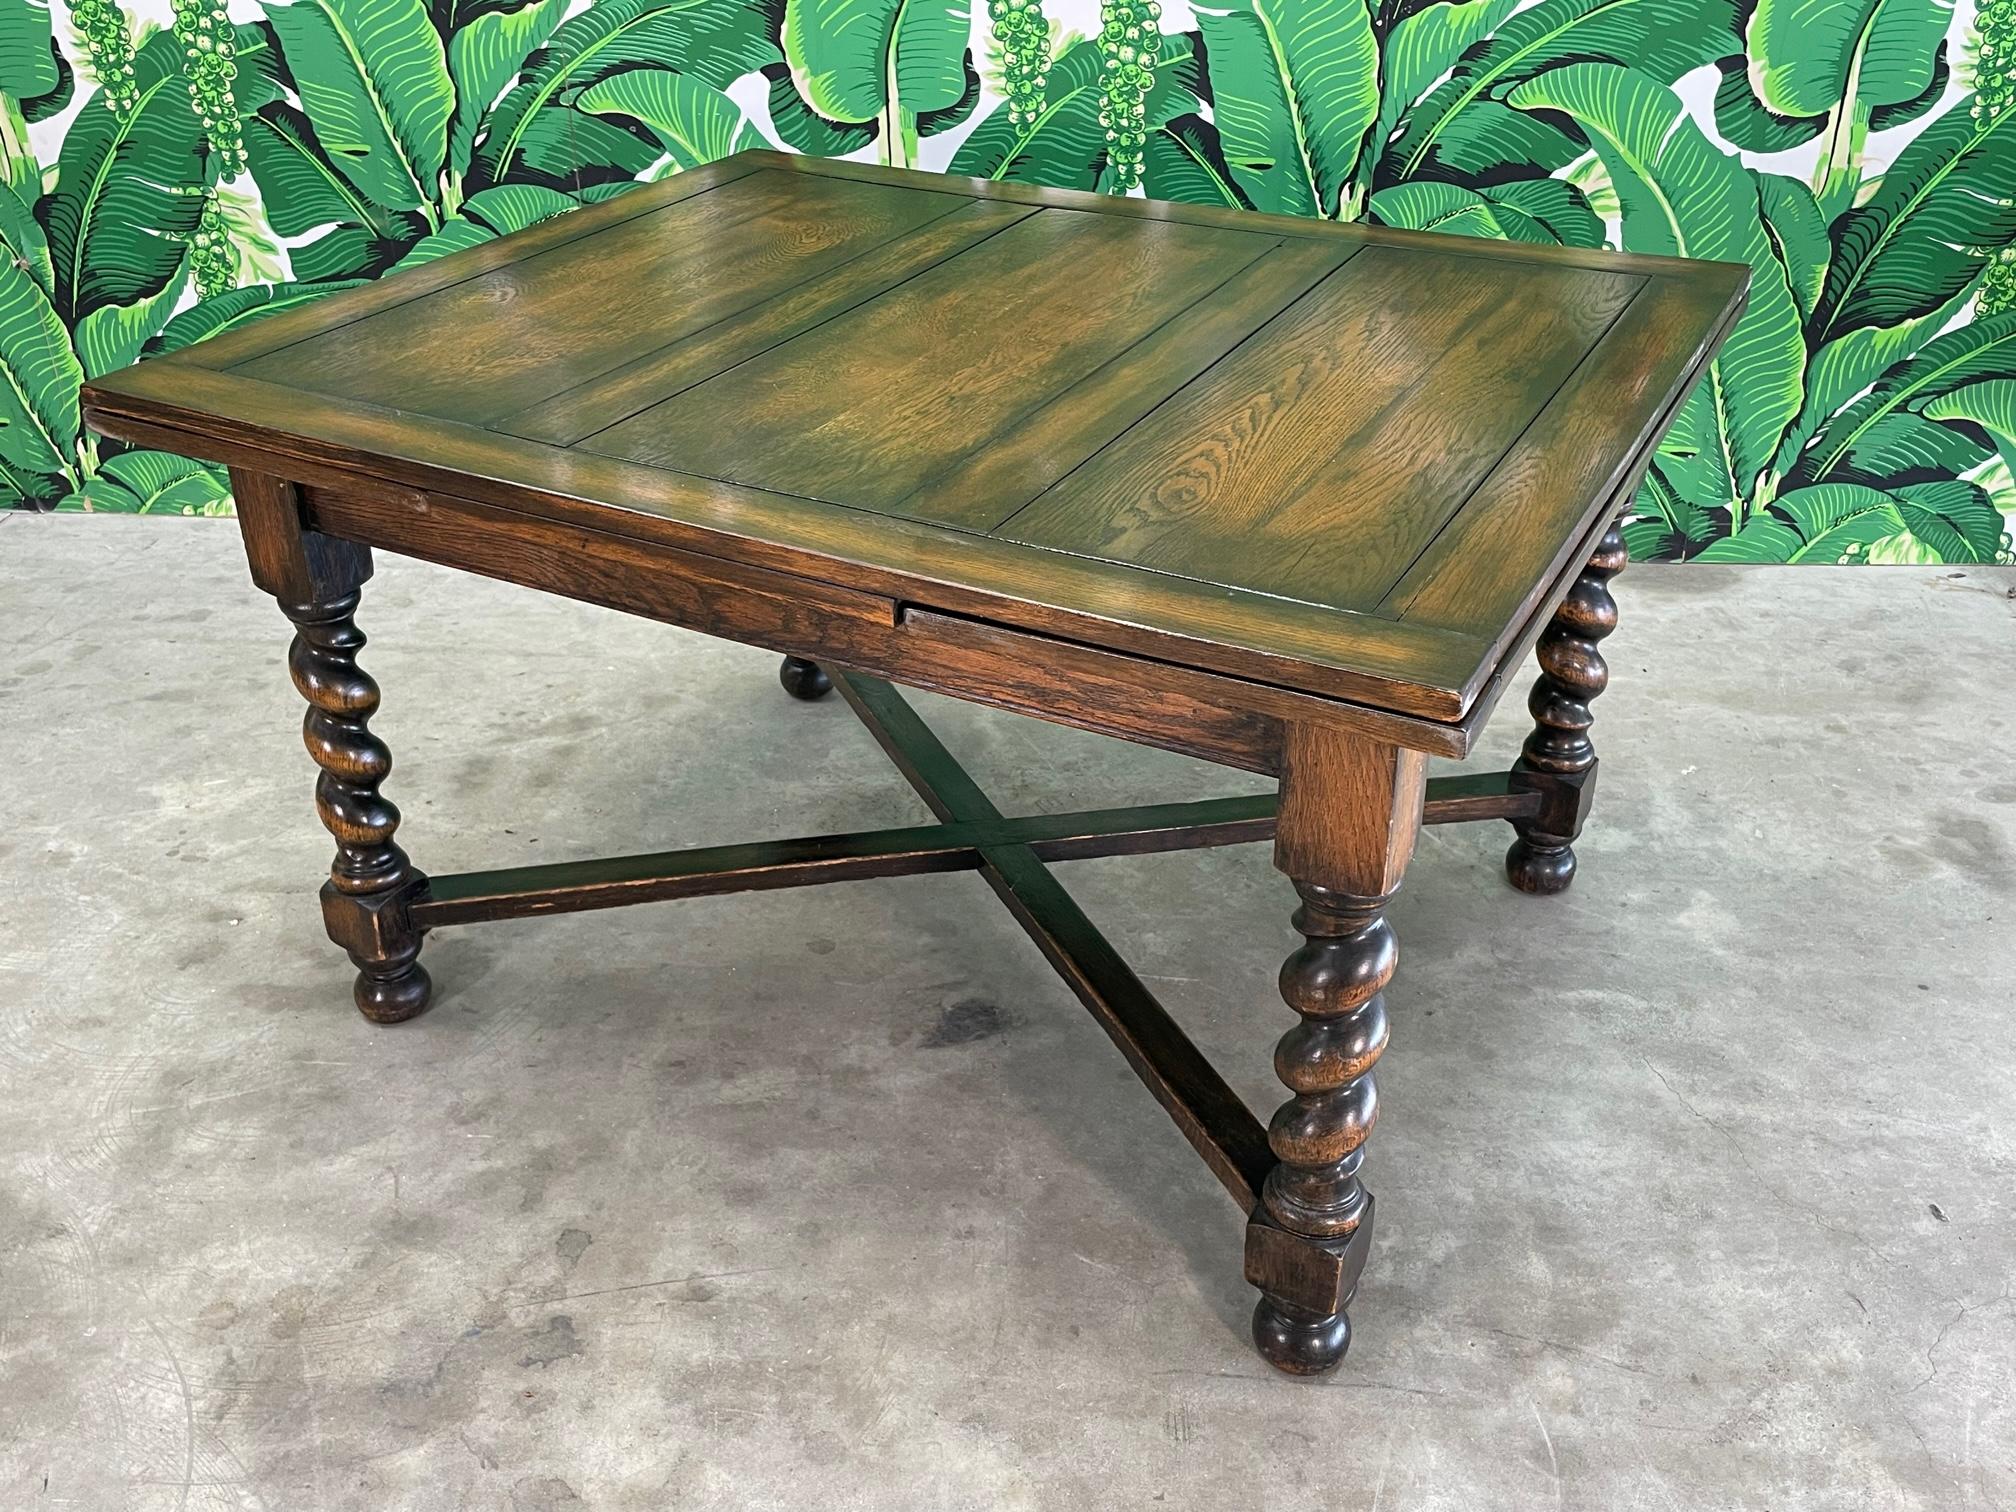 Spanish Colonial Heavy Carved Wood Dining Table In Good Condition For Sale In Jacksonville, FL